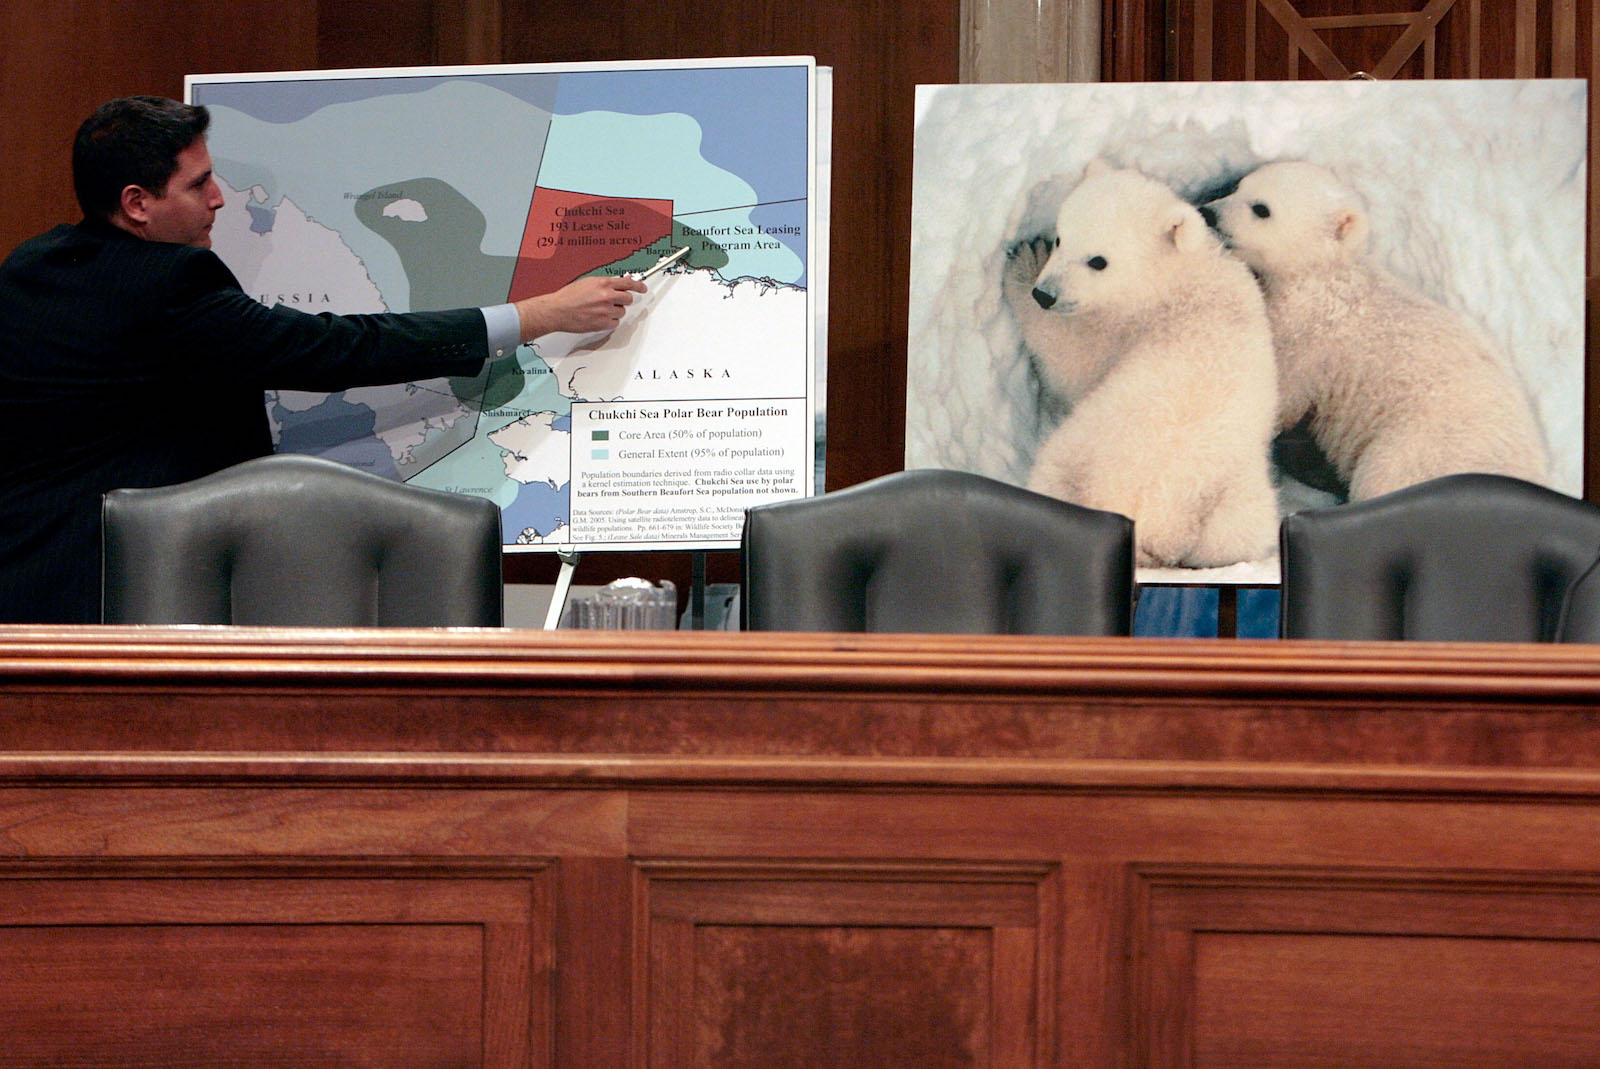 a man points to a mpa of alaska next to a picture of polar bears